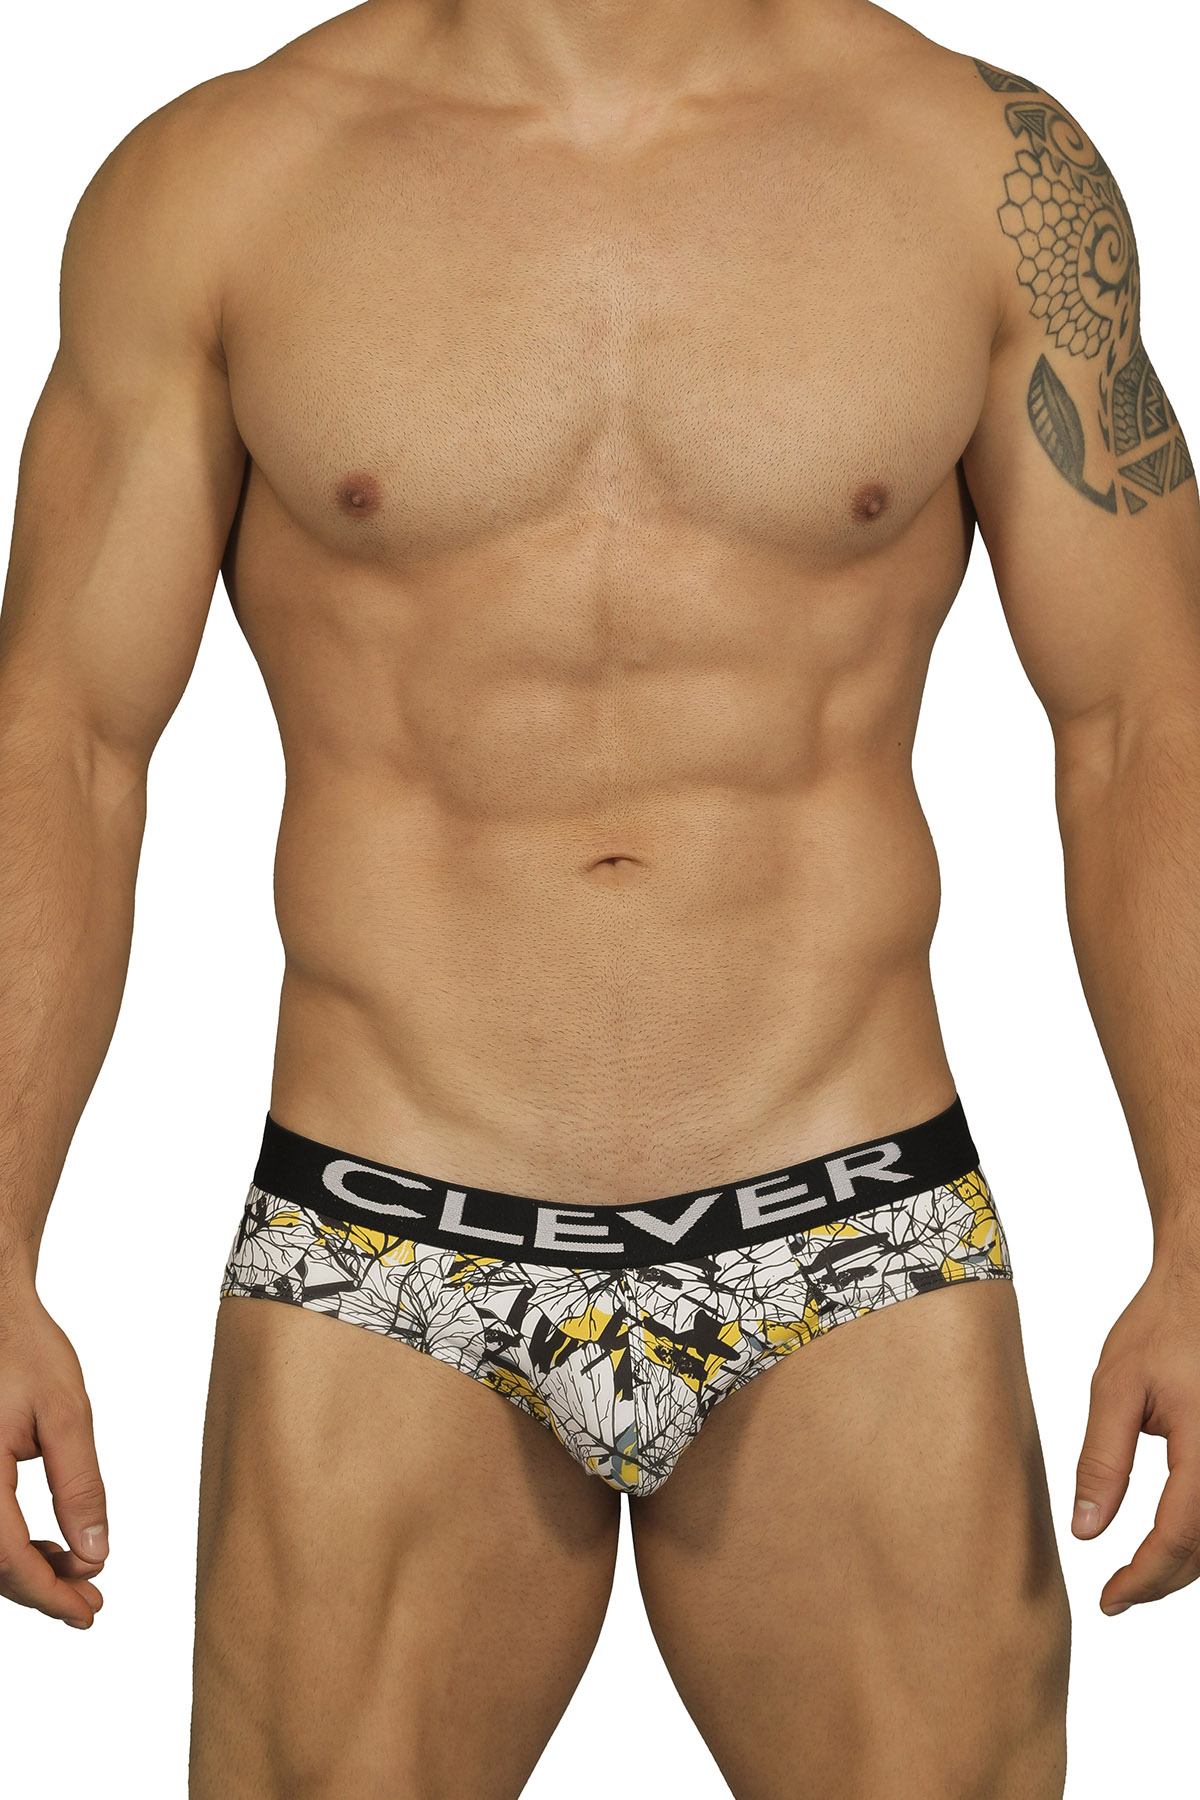 Clever Limited Edition White Brief 519947